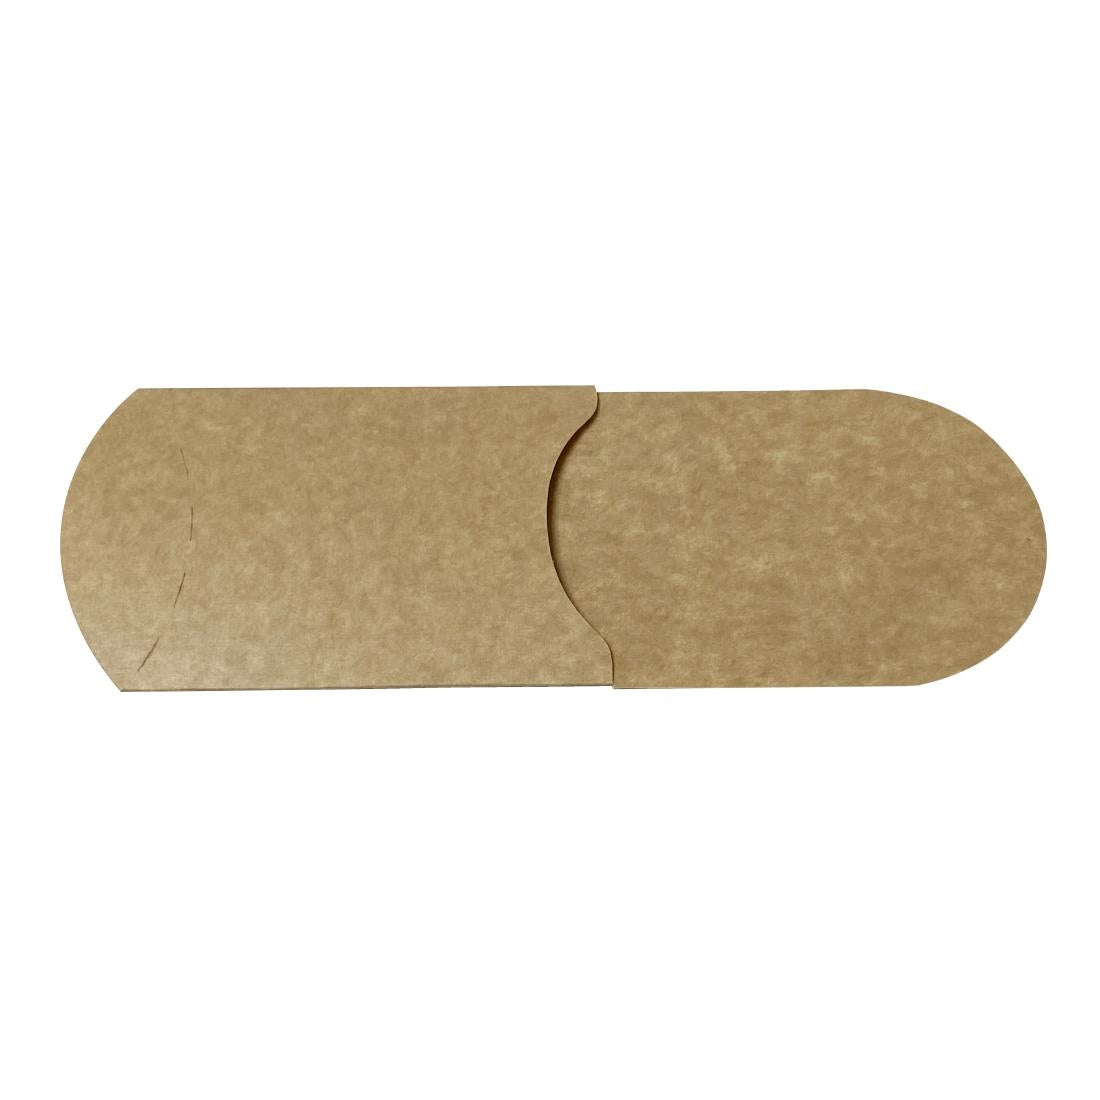 FT655 Fiesta Recyclable Tortilla Wrap Pocket (Pack of 1000) JD Catering Equipment Solutions Ltd